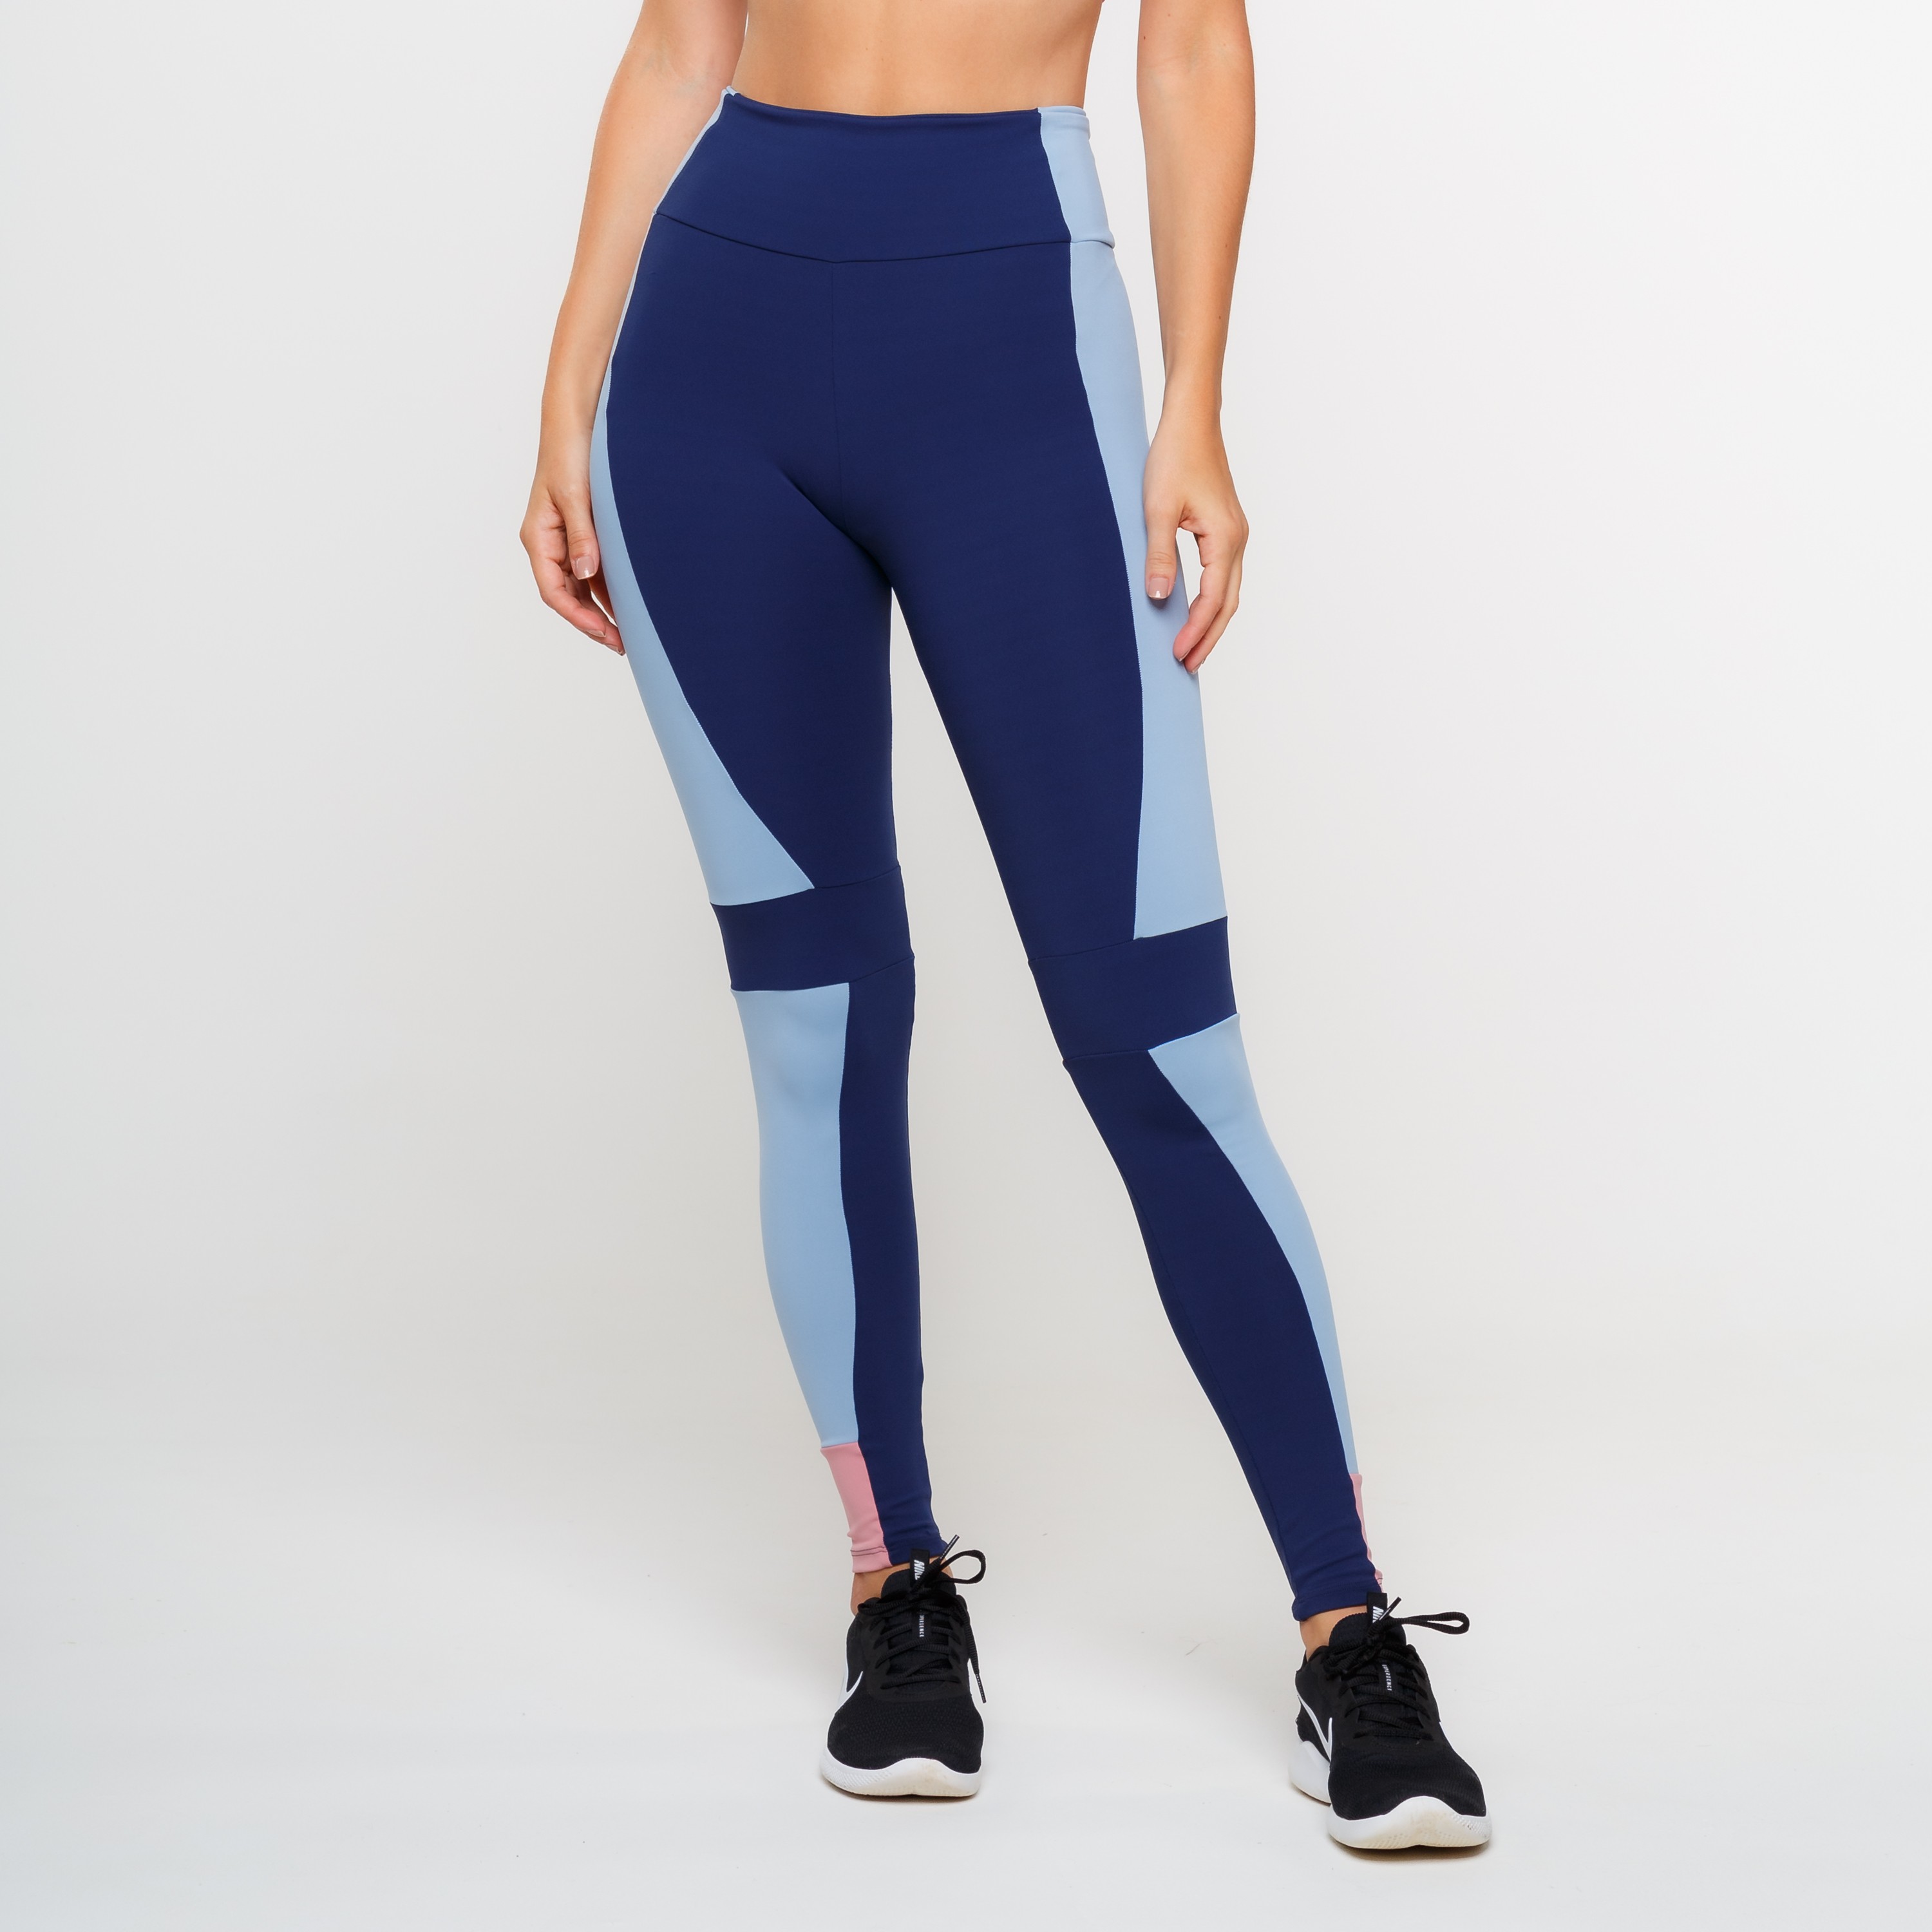 South Industrialize court Legging Maxxi - Guilff